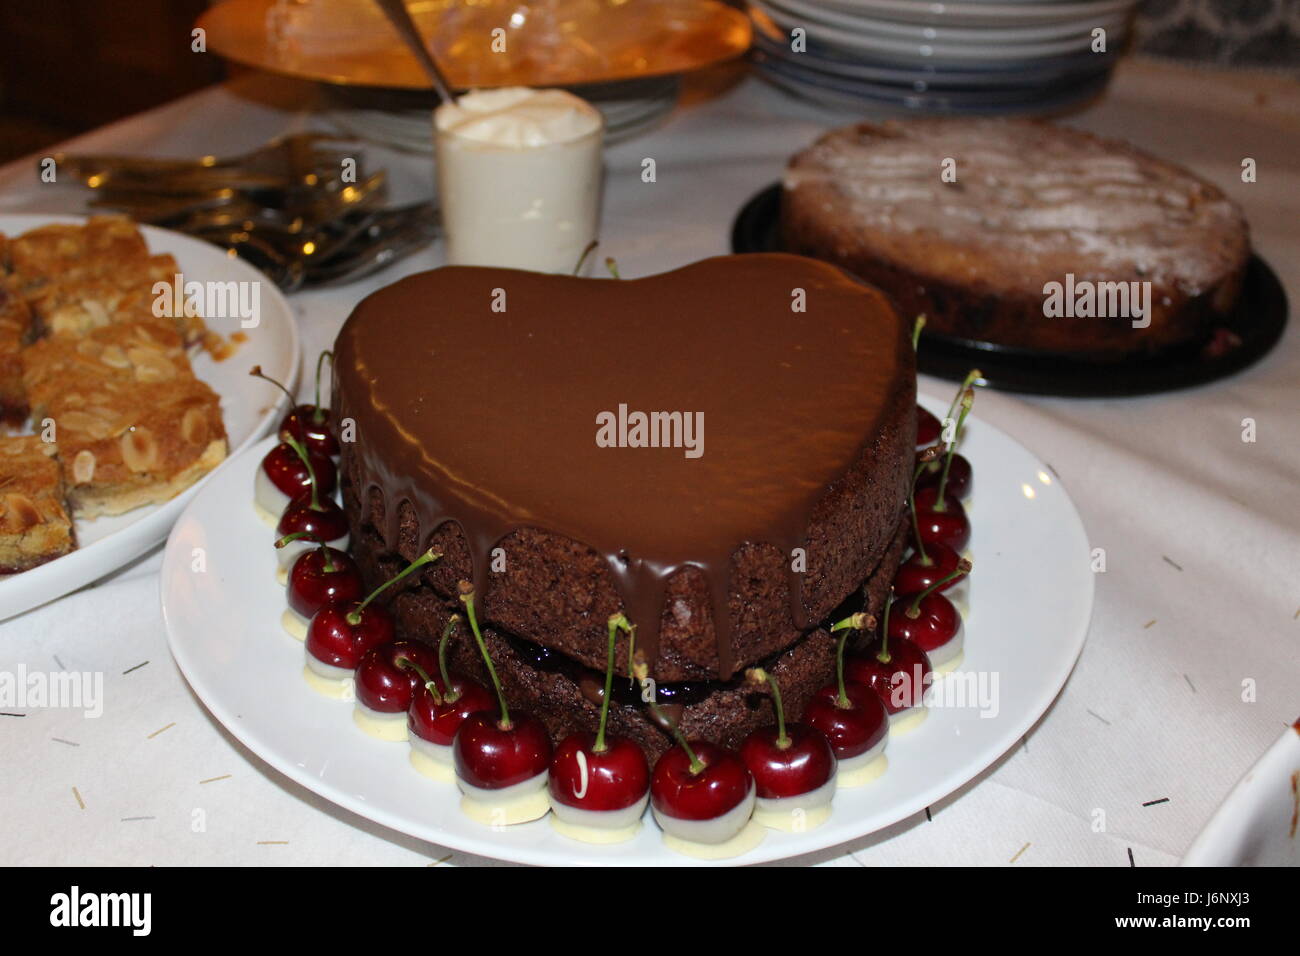 Heart shaped chocolate cake surrounded by fresh cherries dipped in ...